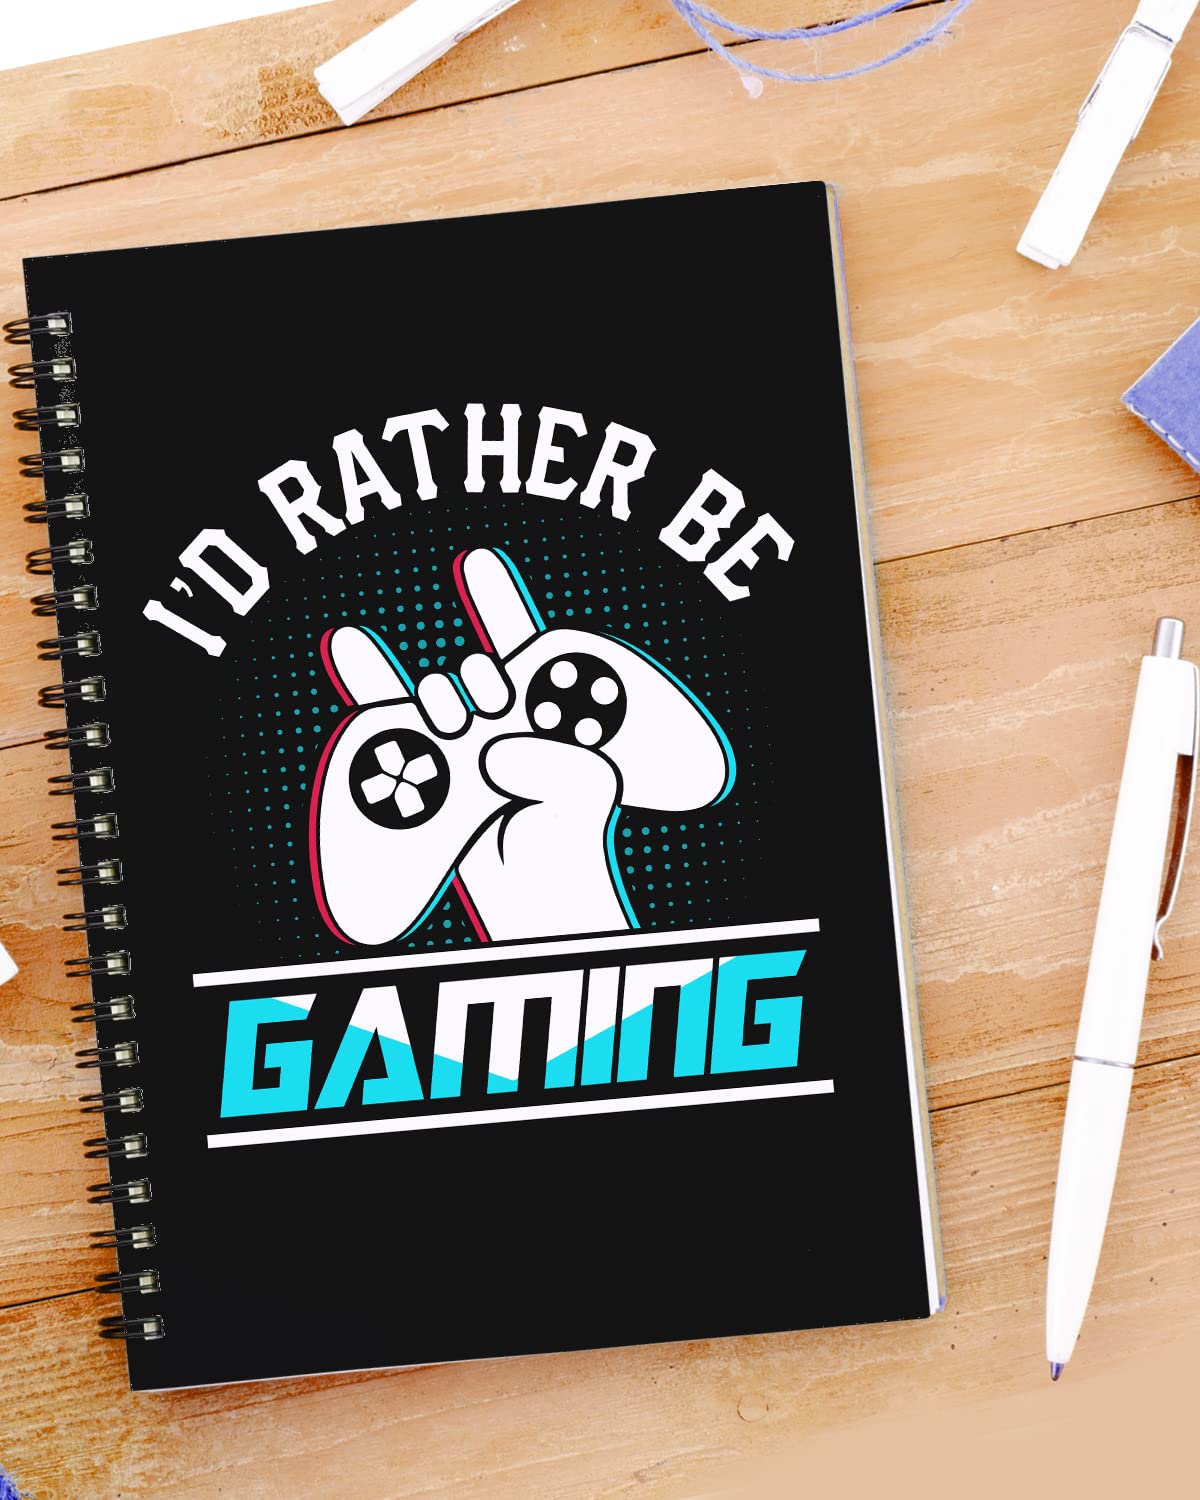 I'd Rather Be Gaming Spiral Notebook